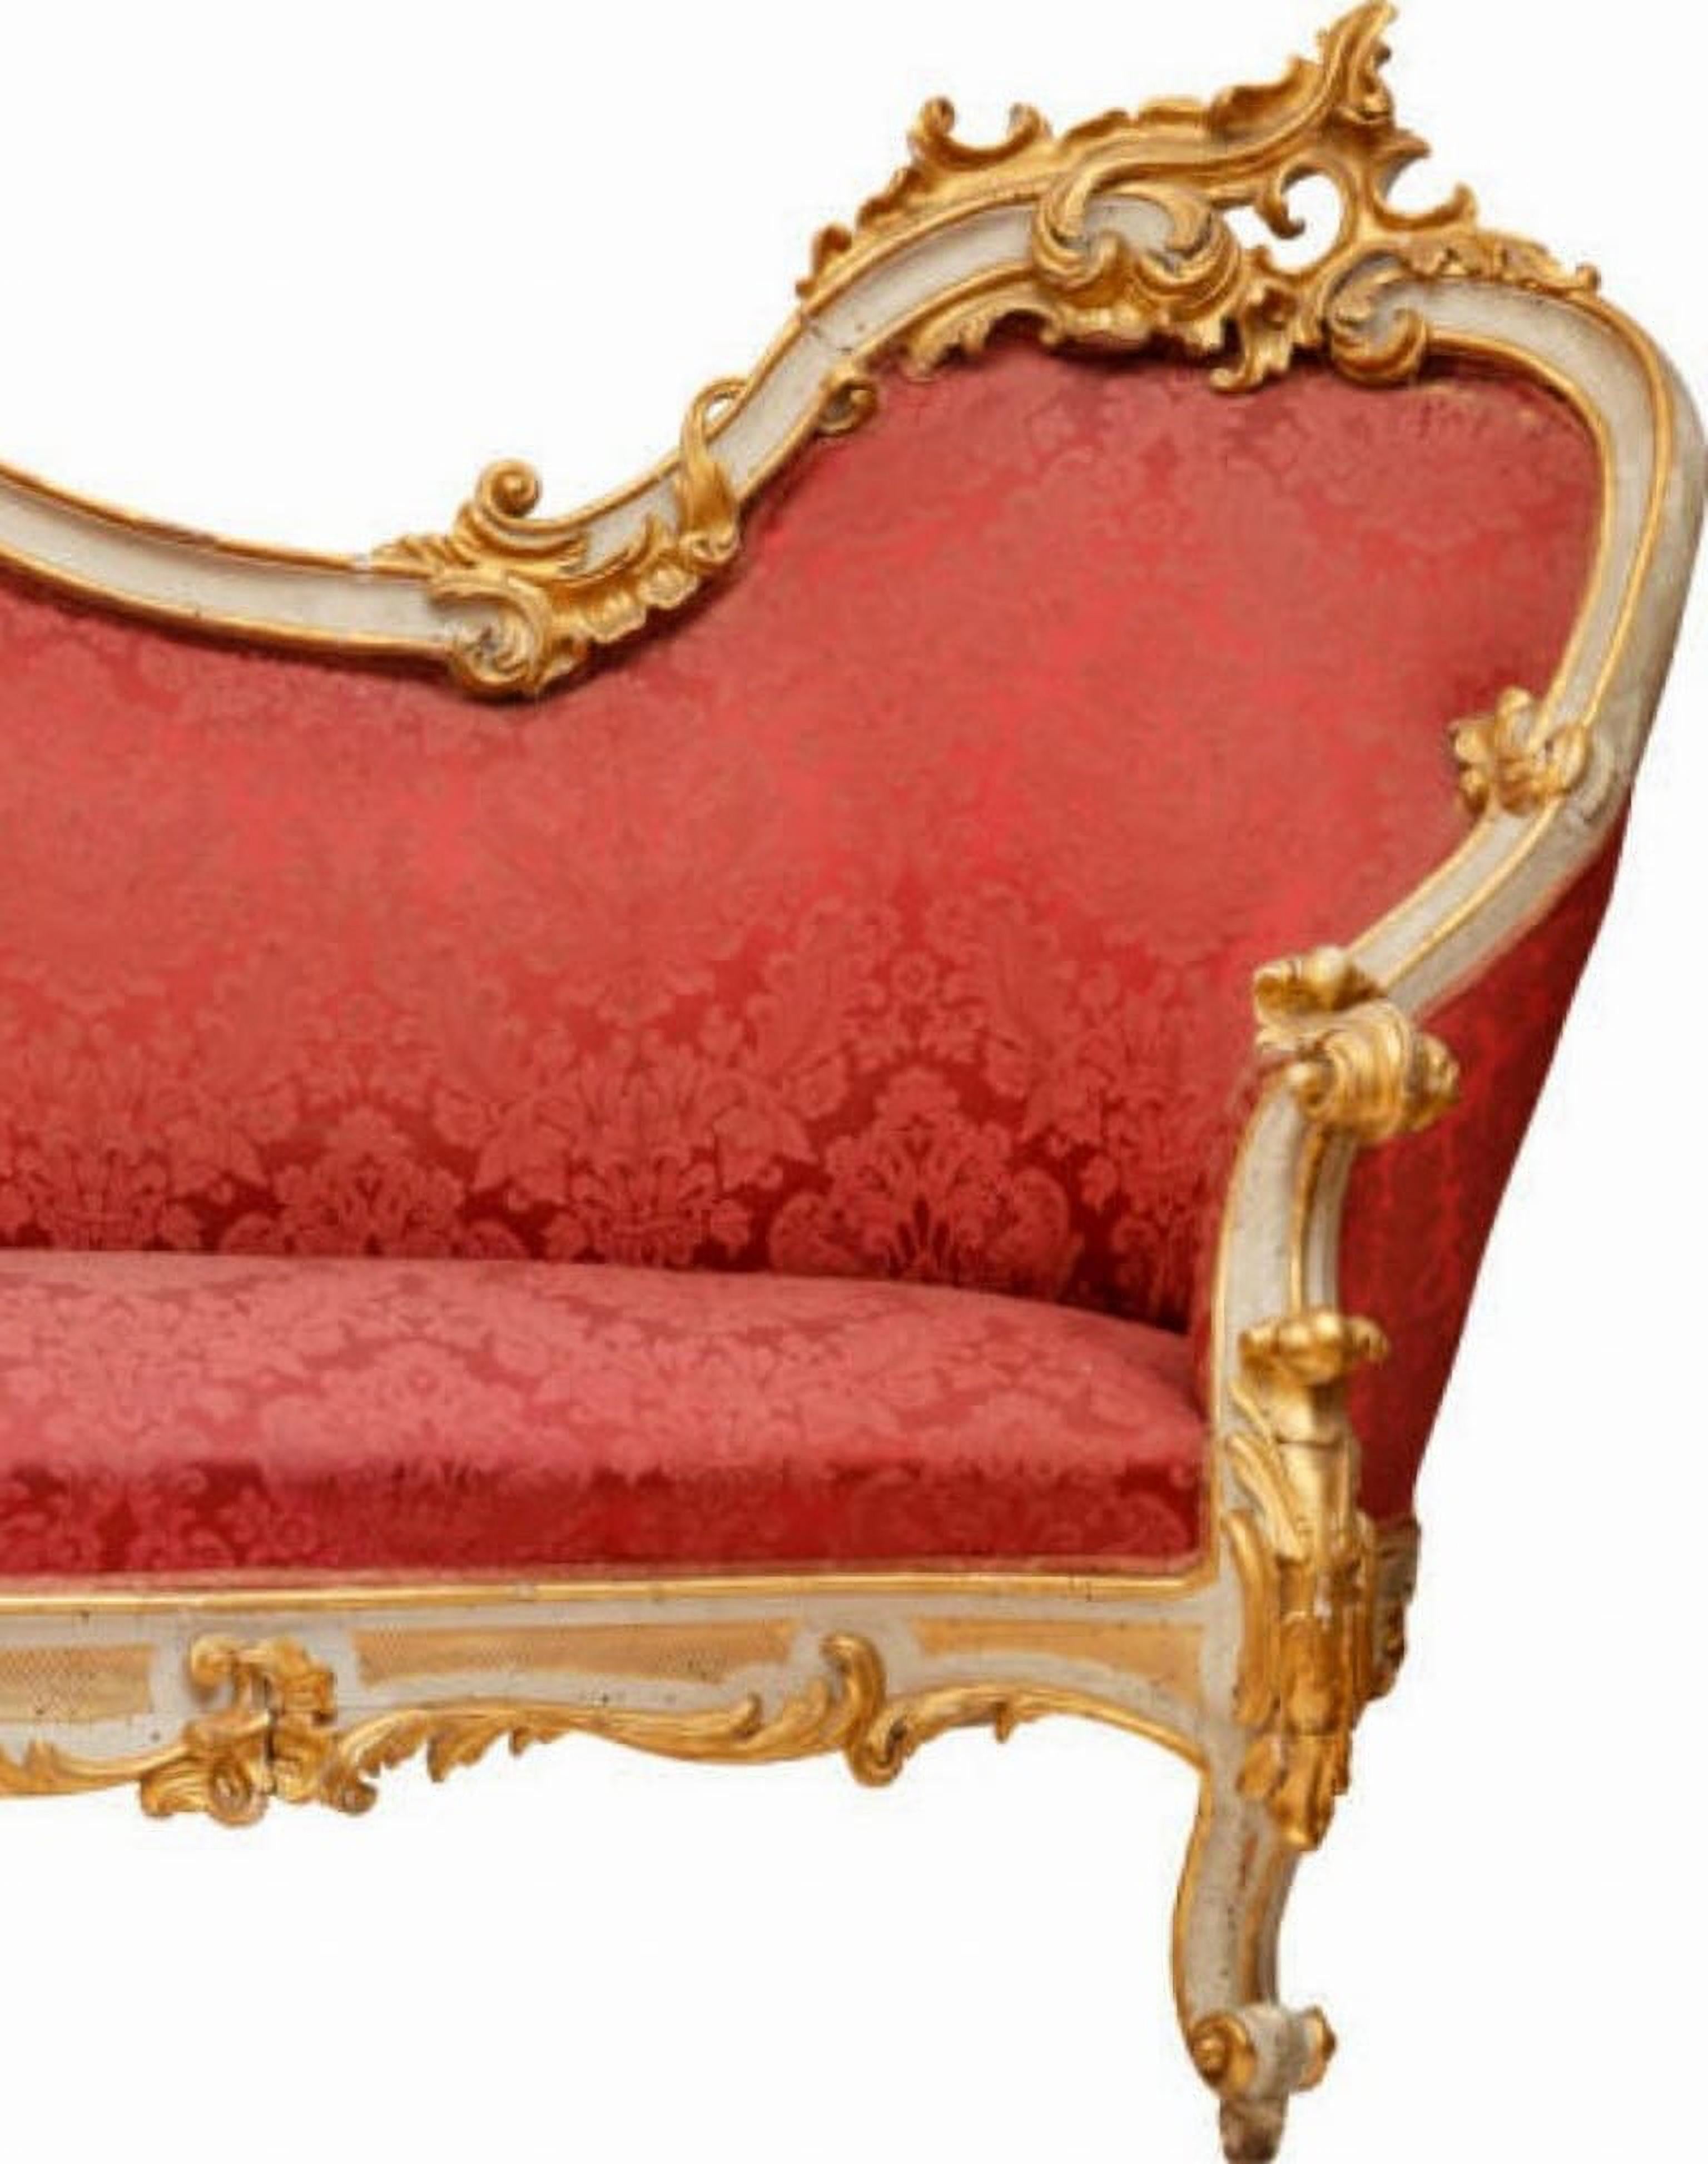 Hand-Crafted Rich Louis XV Sofa, Italy, 18th Century